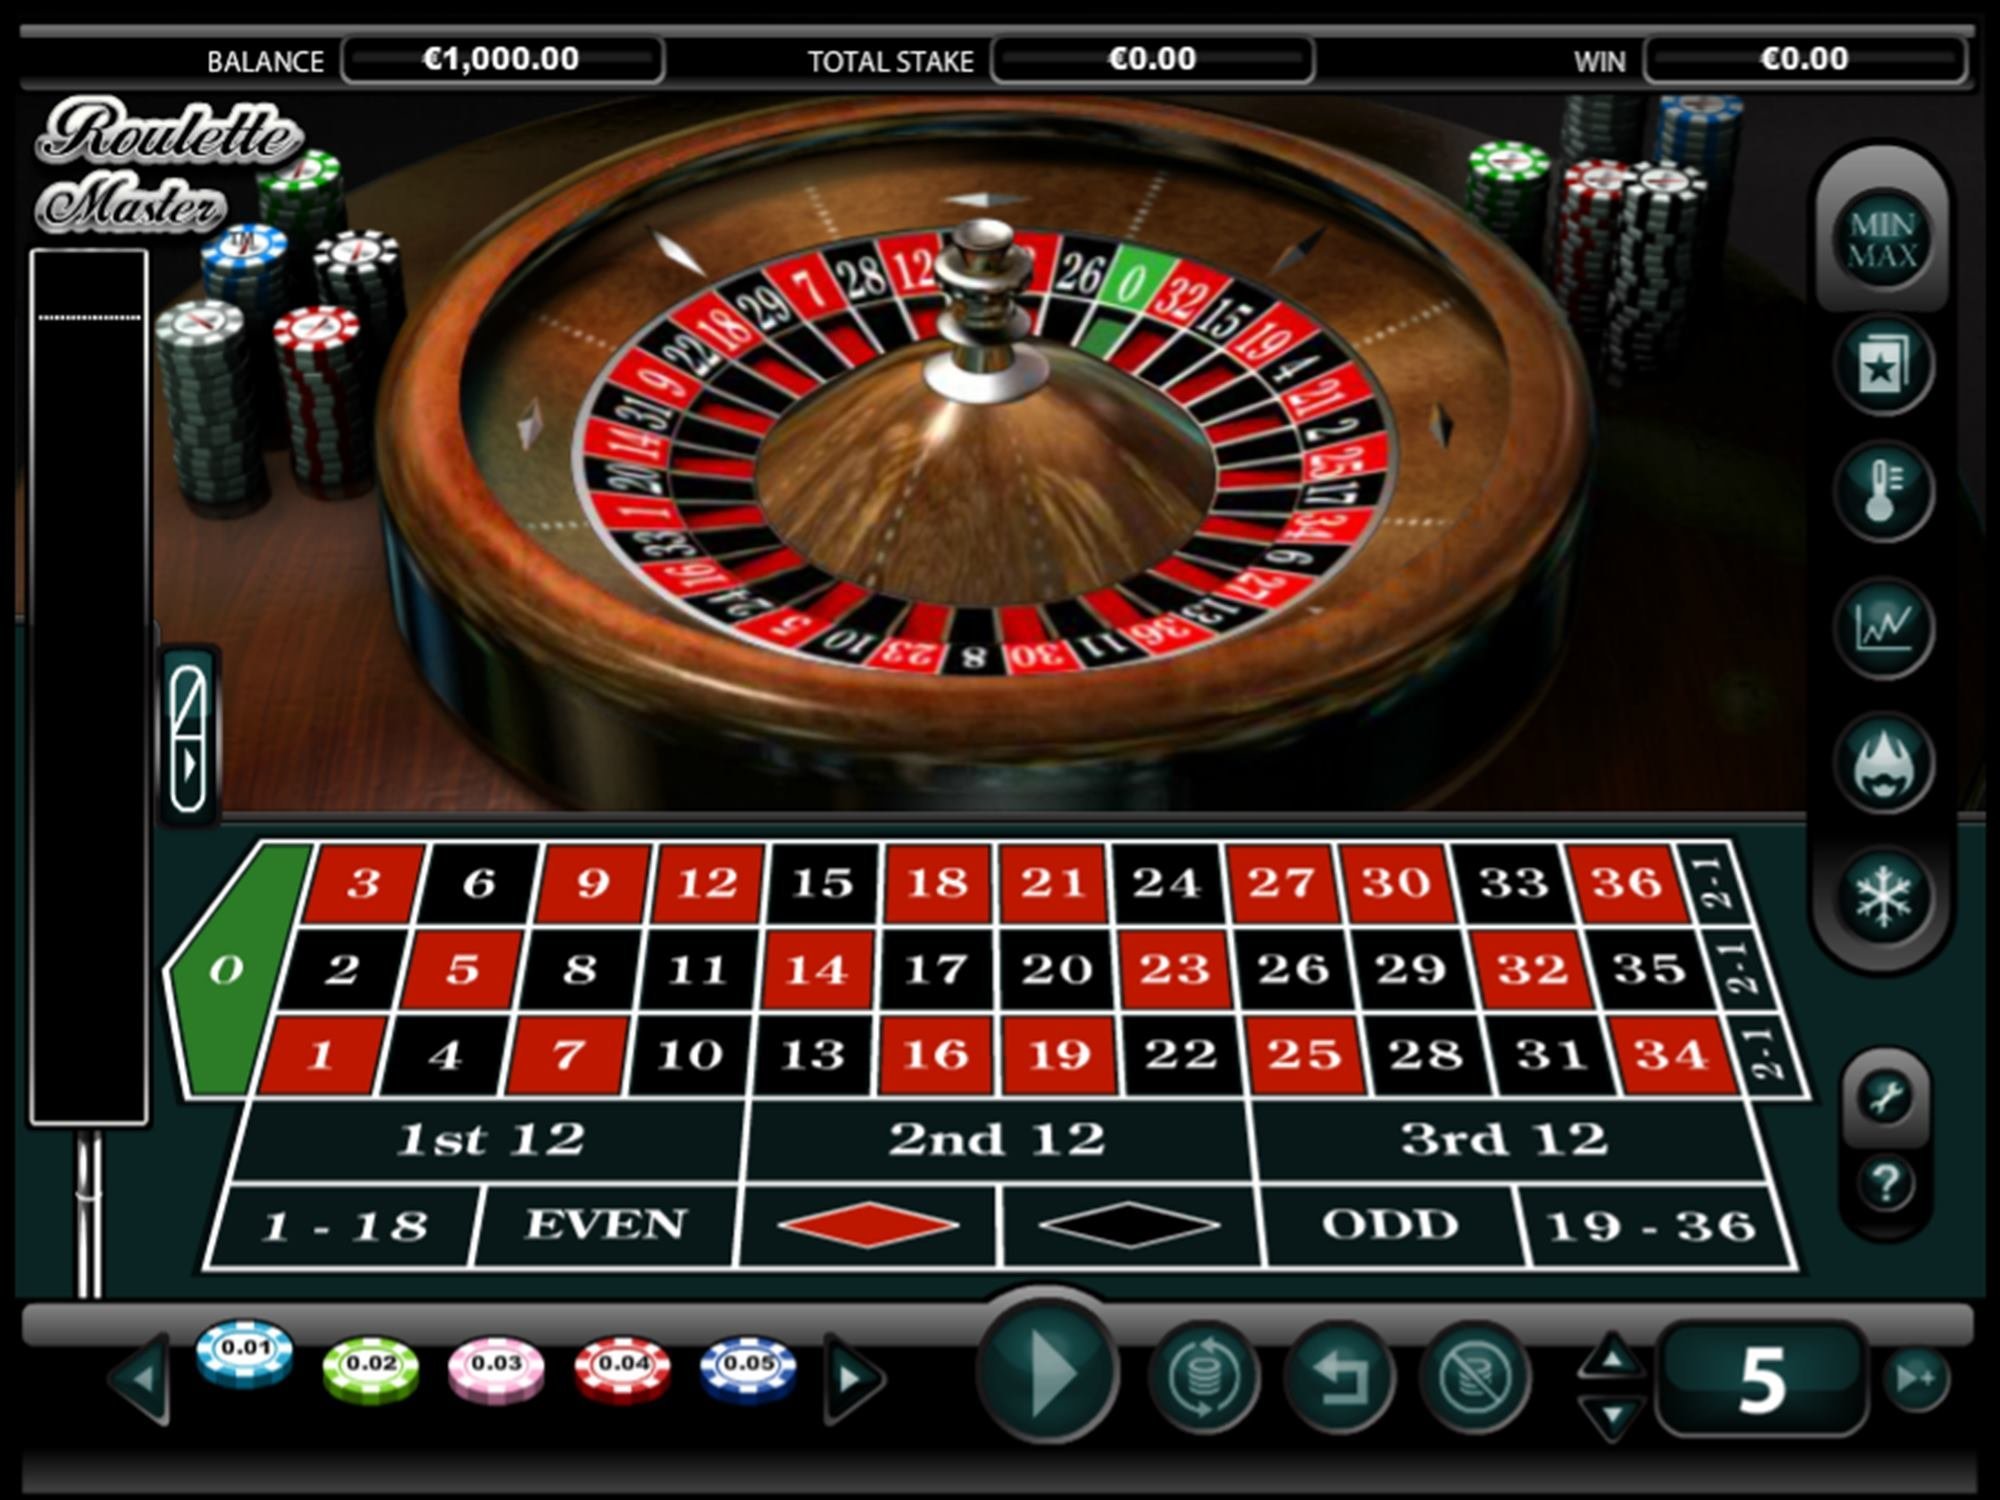 Play roulette games. Рулетка казино. Рулетка игра. Рулетка игровая казино. Игра Рулетка в казино.